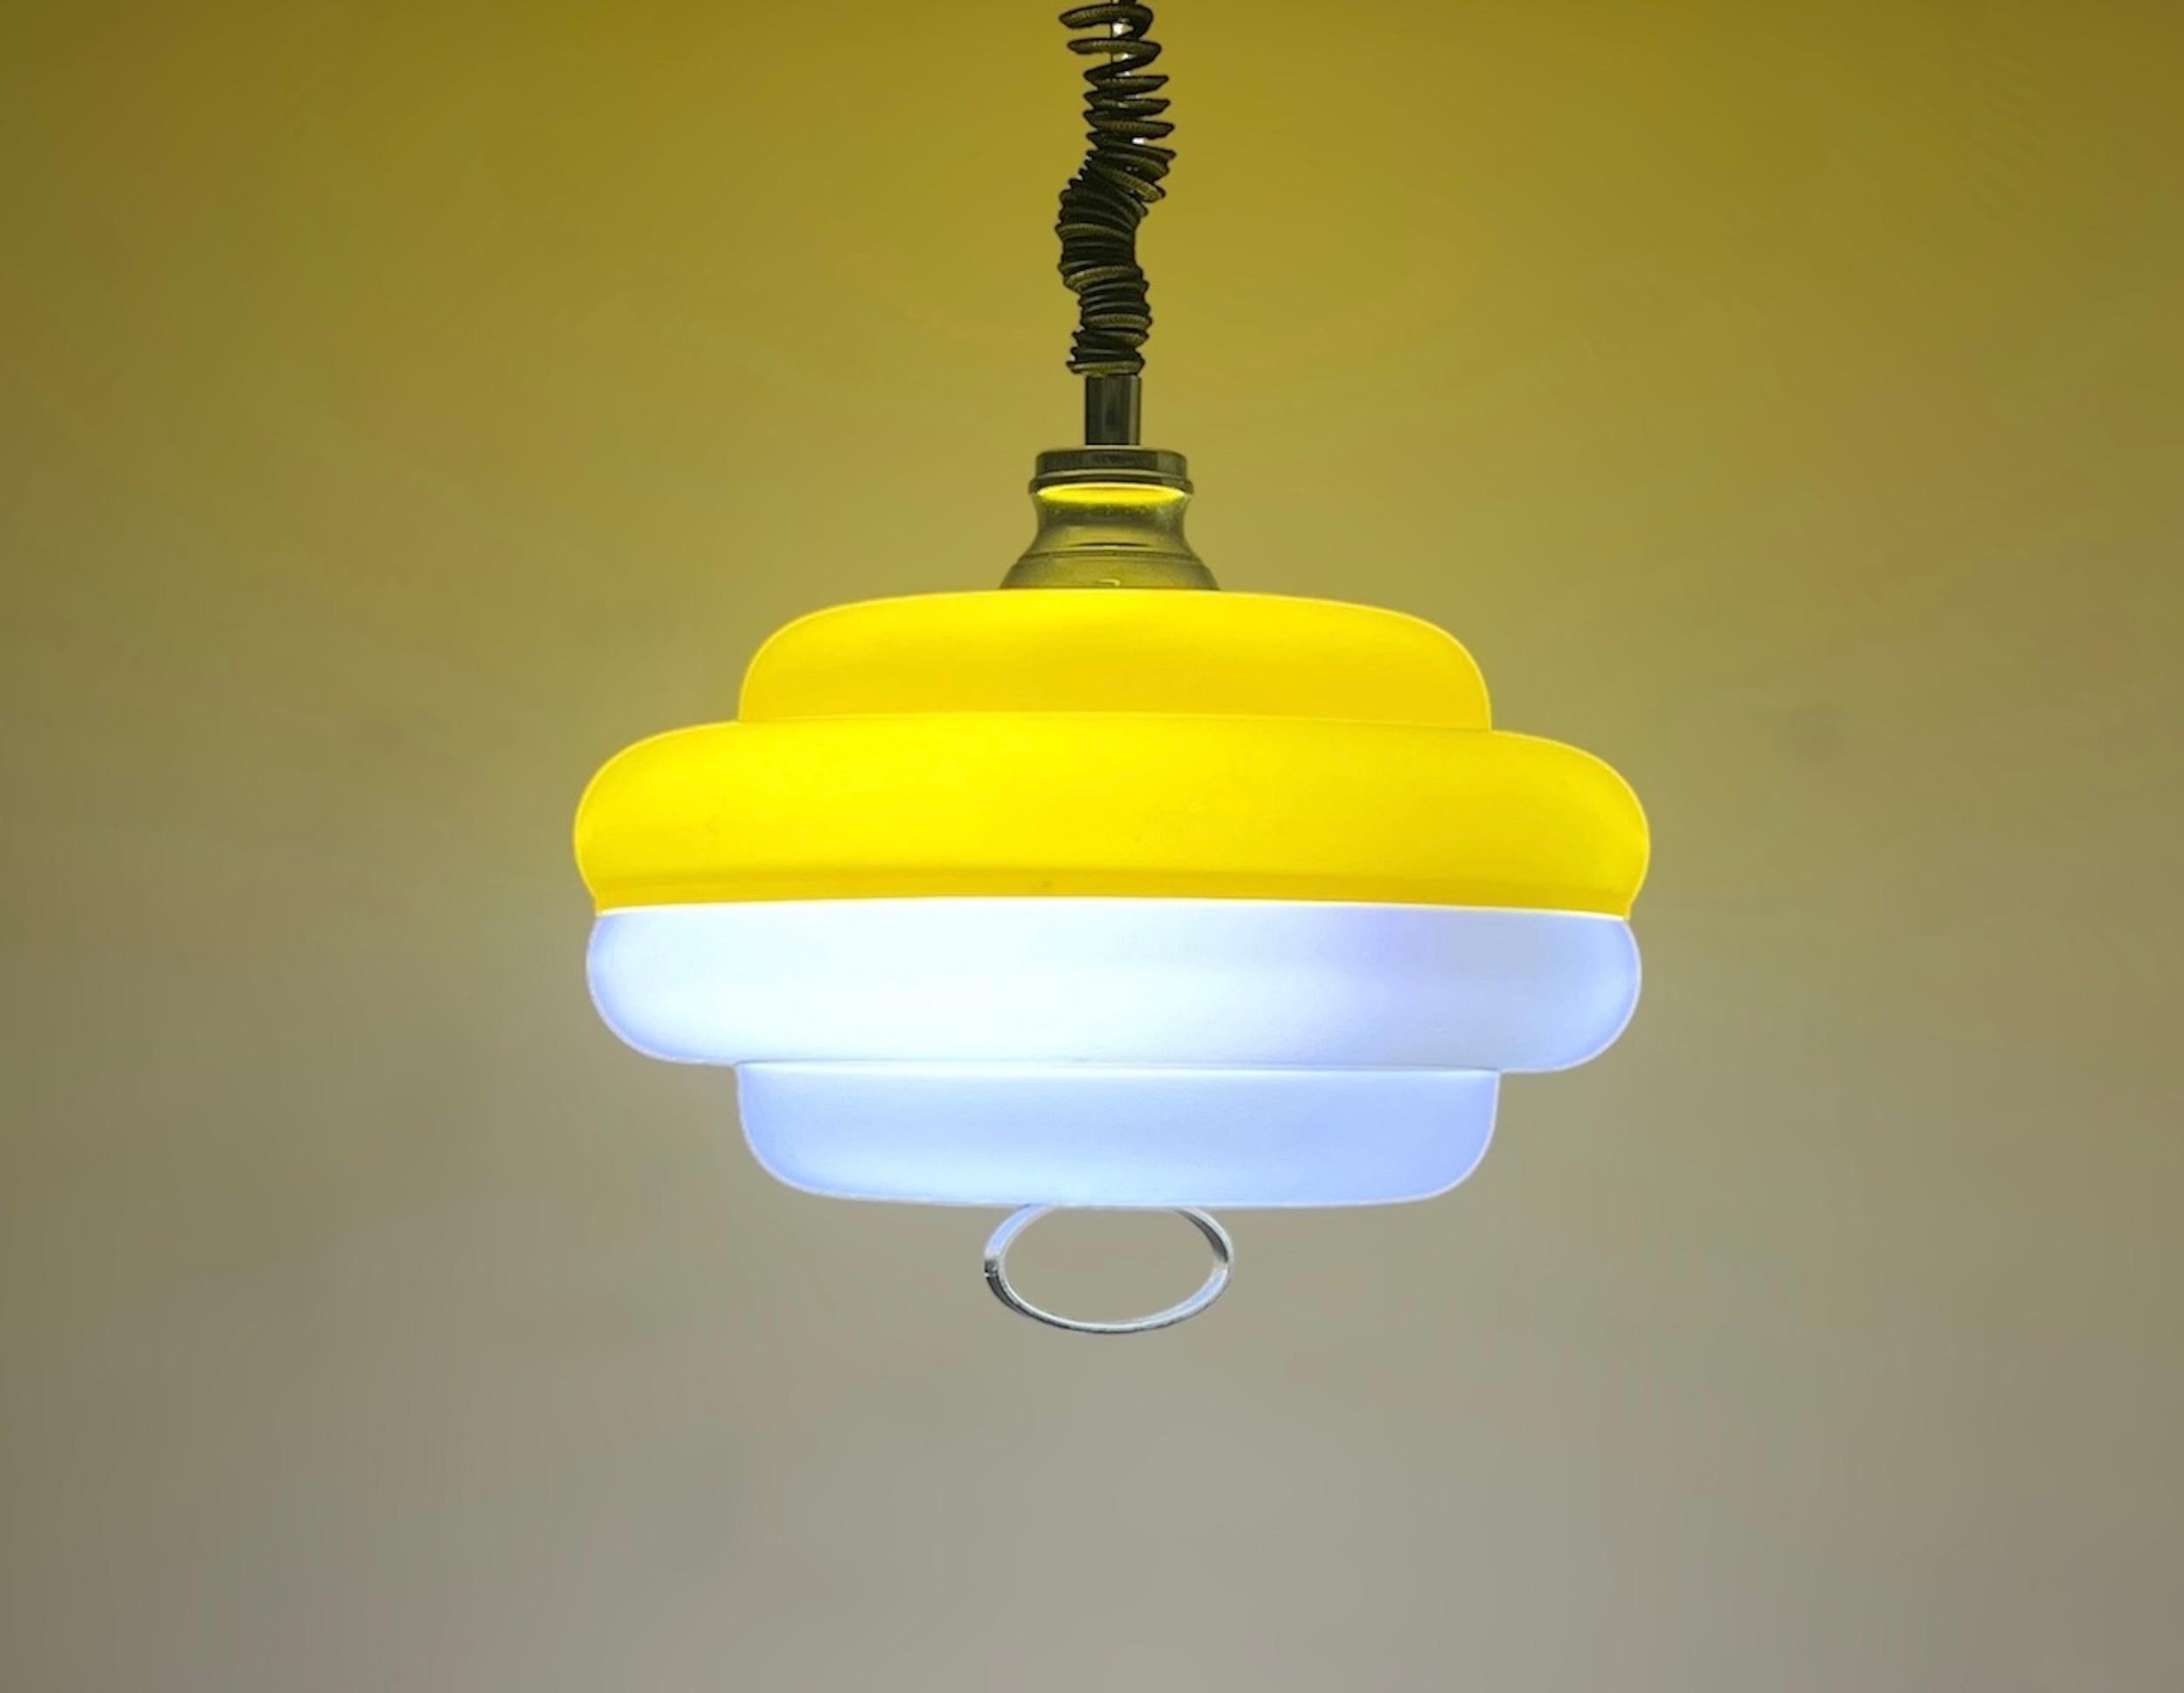 Mid-20th Century Space Age Italian Hanging Lamp in Yellow and White Acrylic, 1960s For Sale